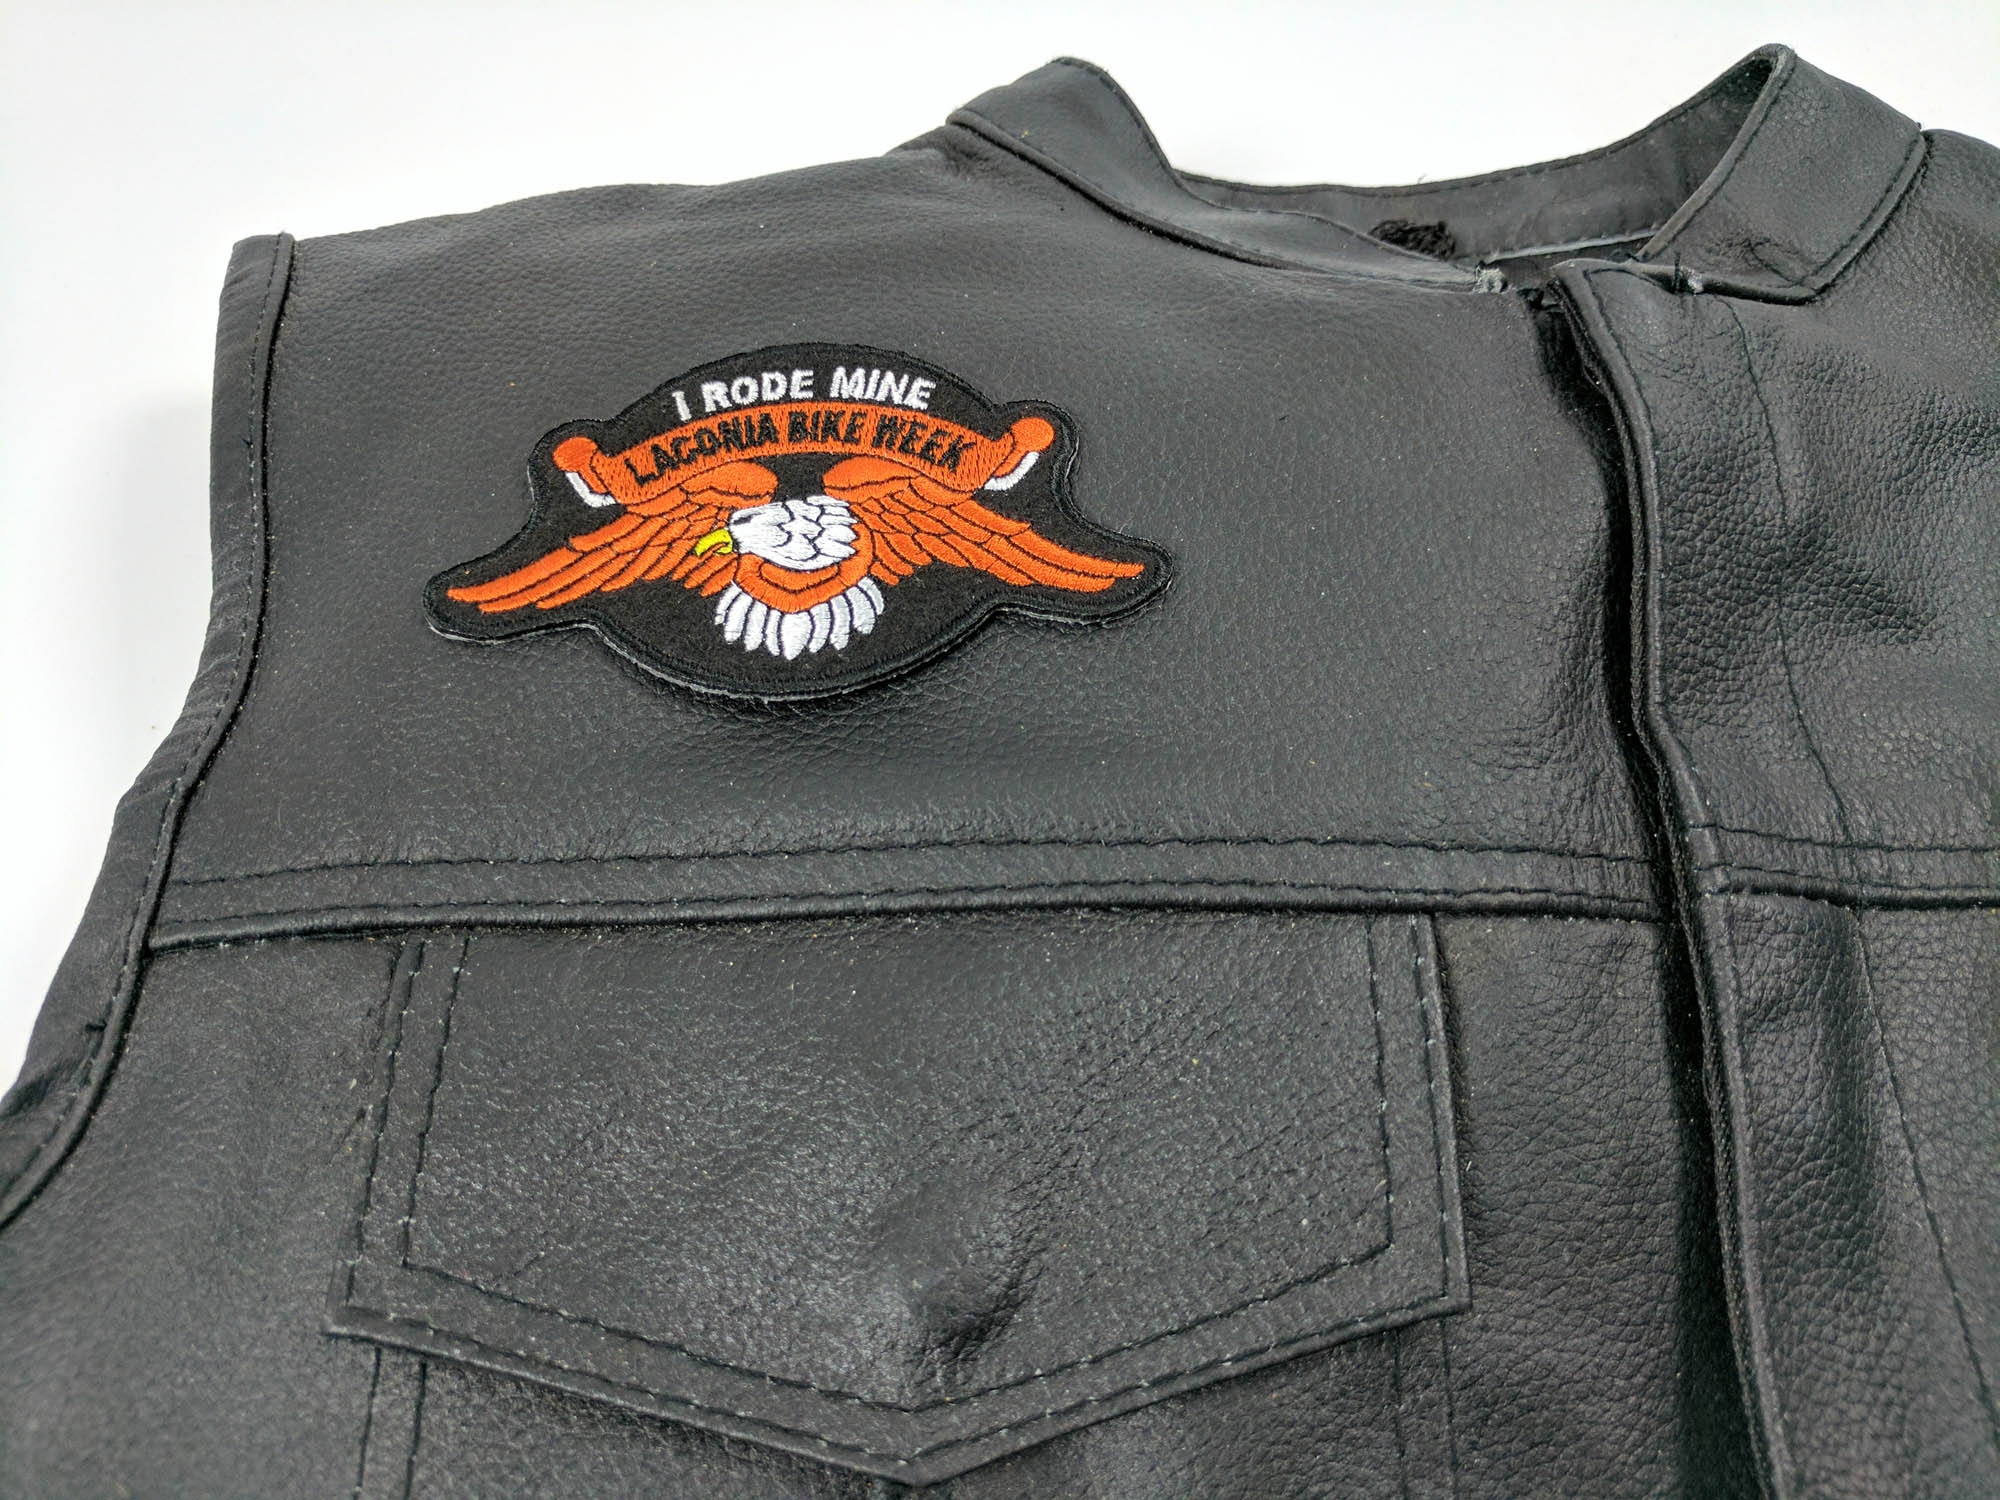 Laconia I Rode Mine Orange Eagle Patch by Ivamis Patches